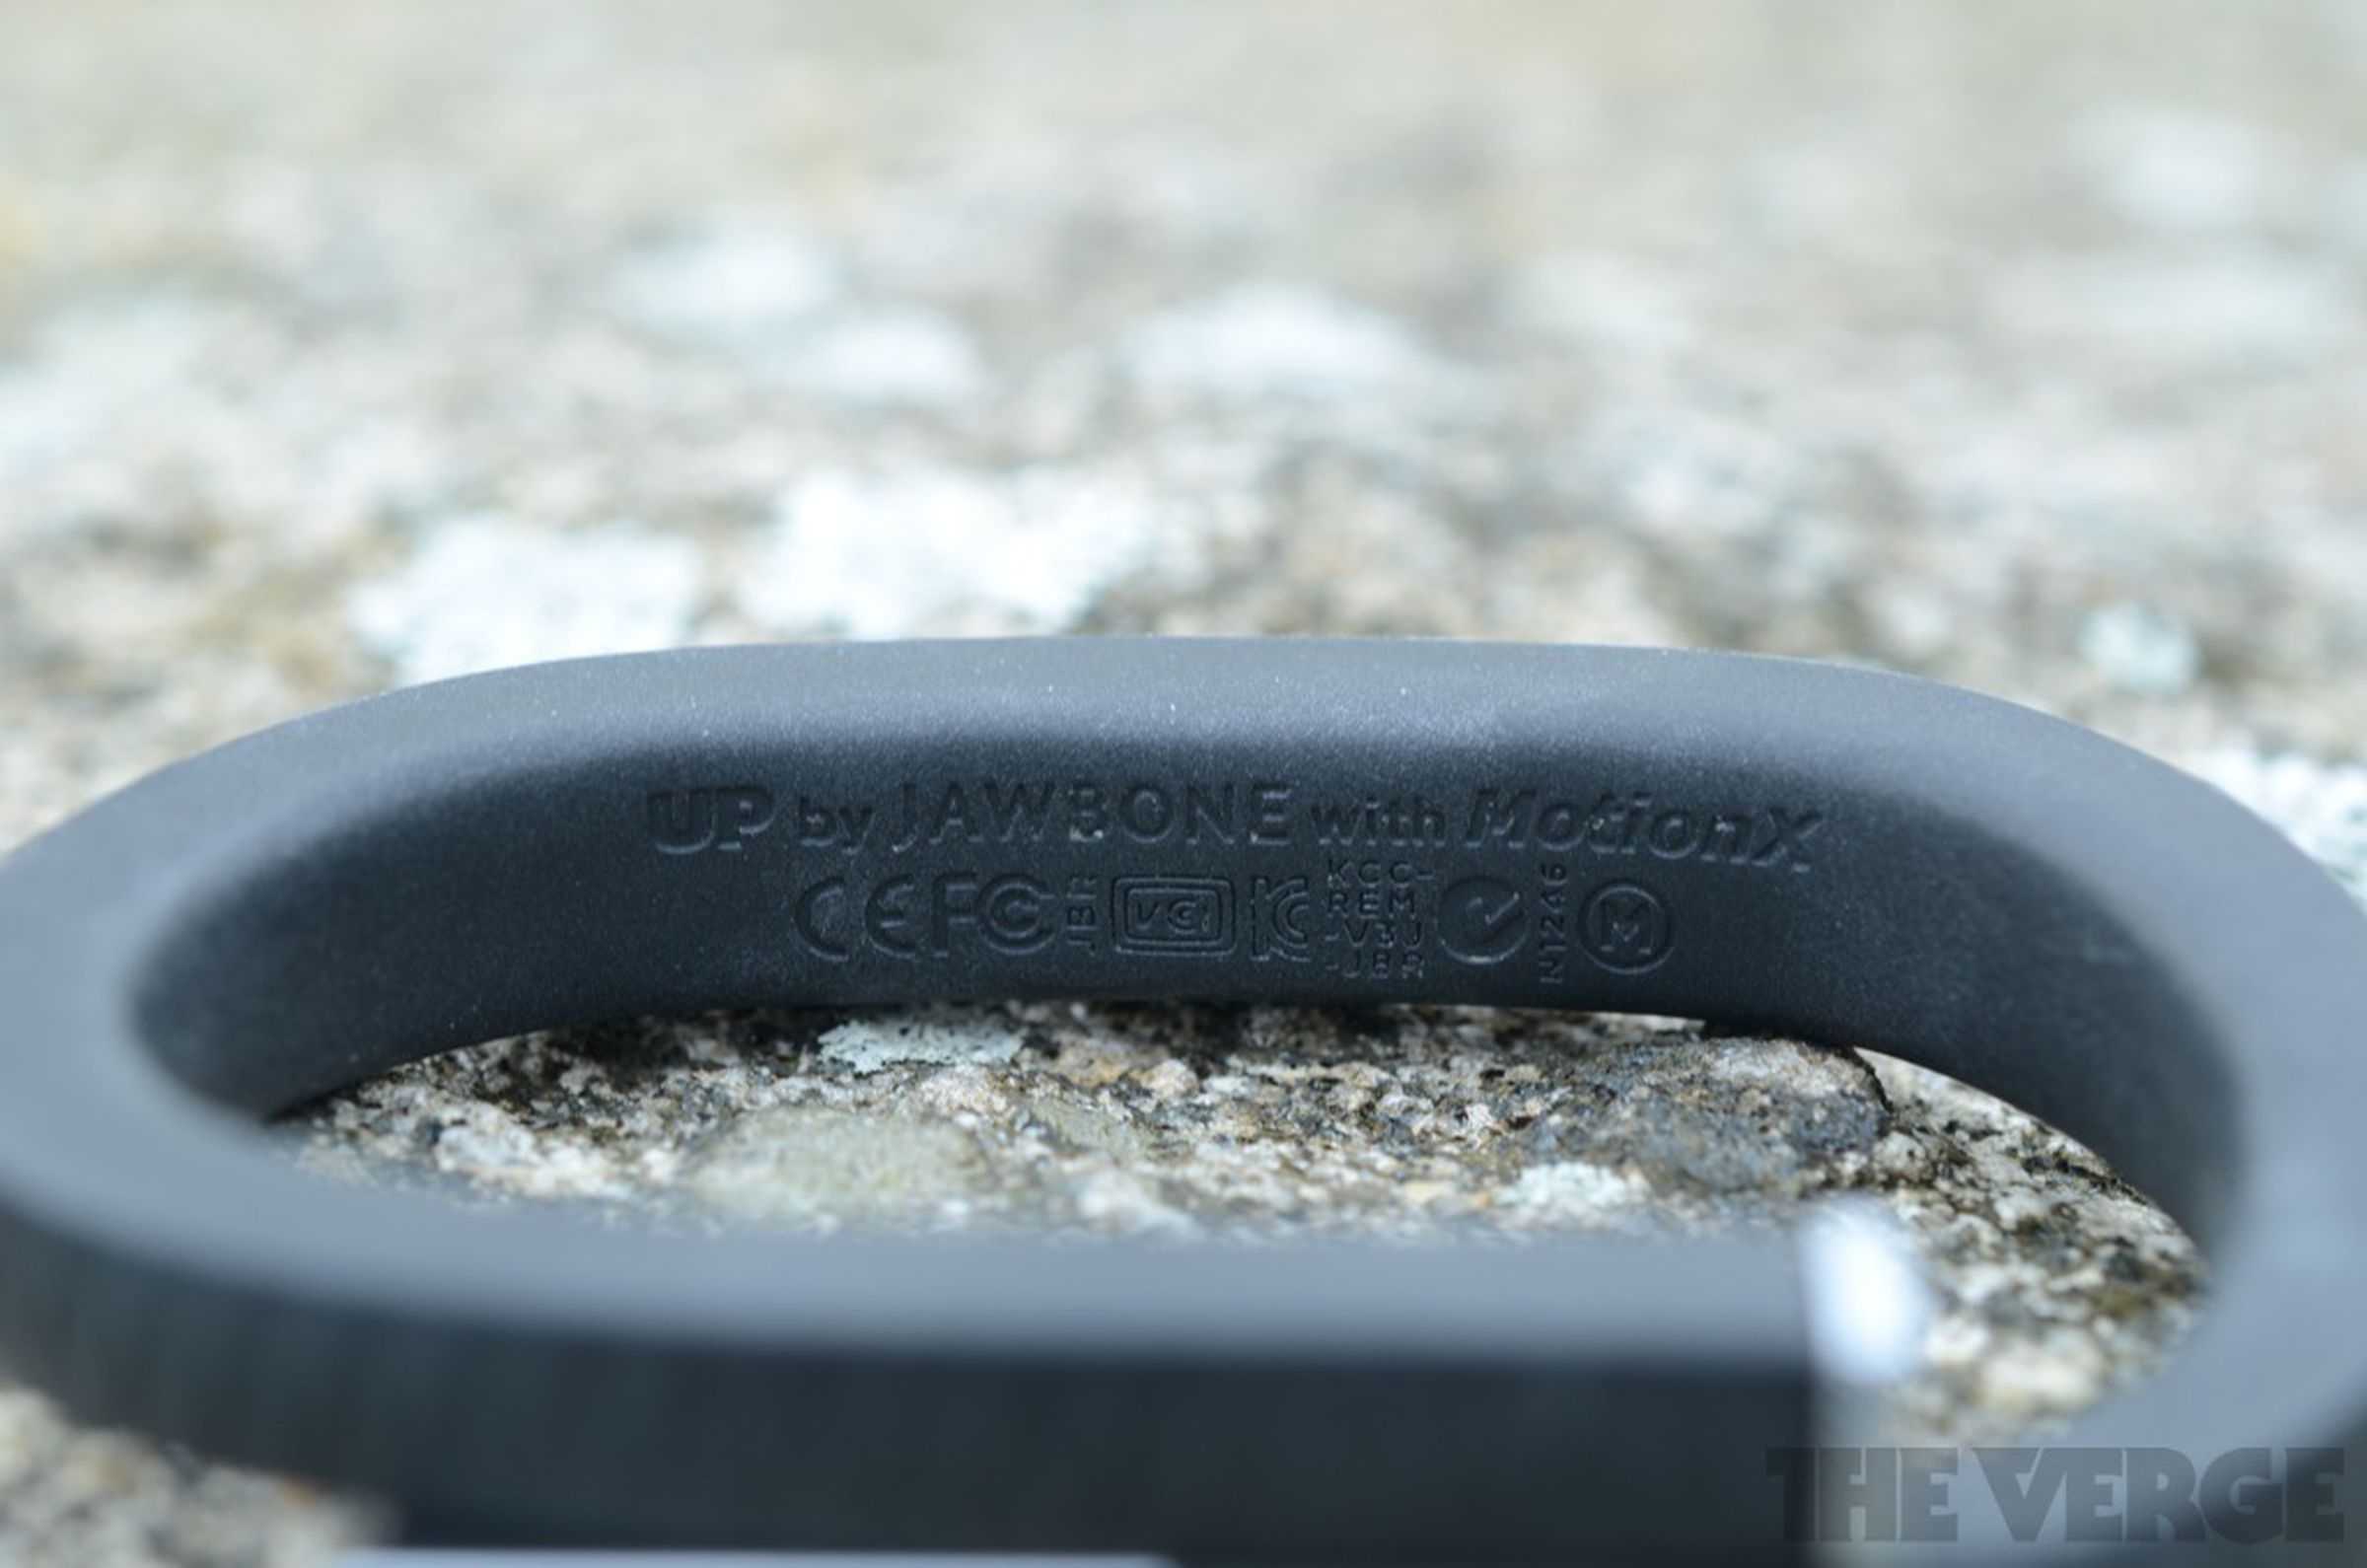 Jawbone Up hands-on pictures (2012)